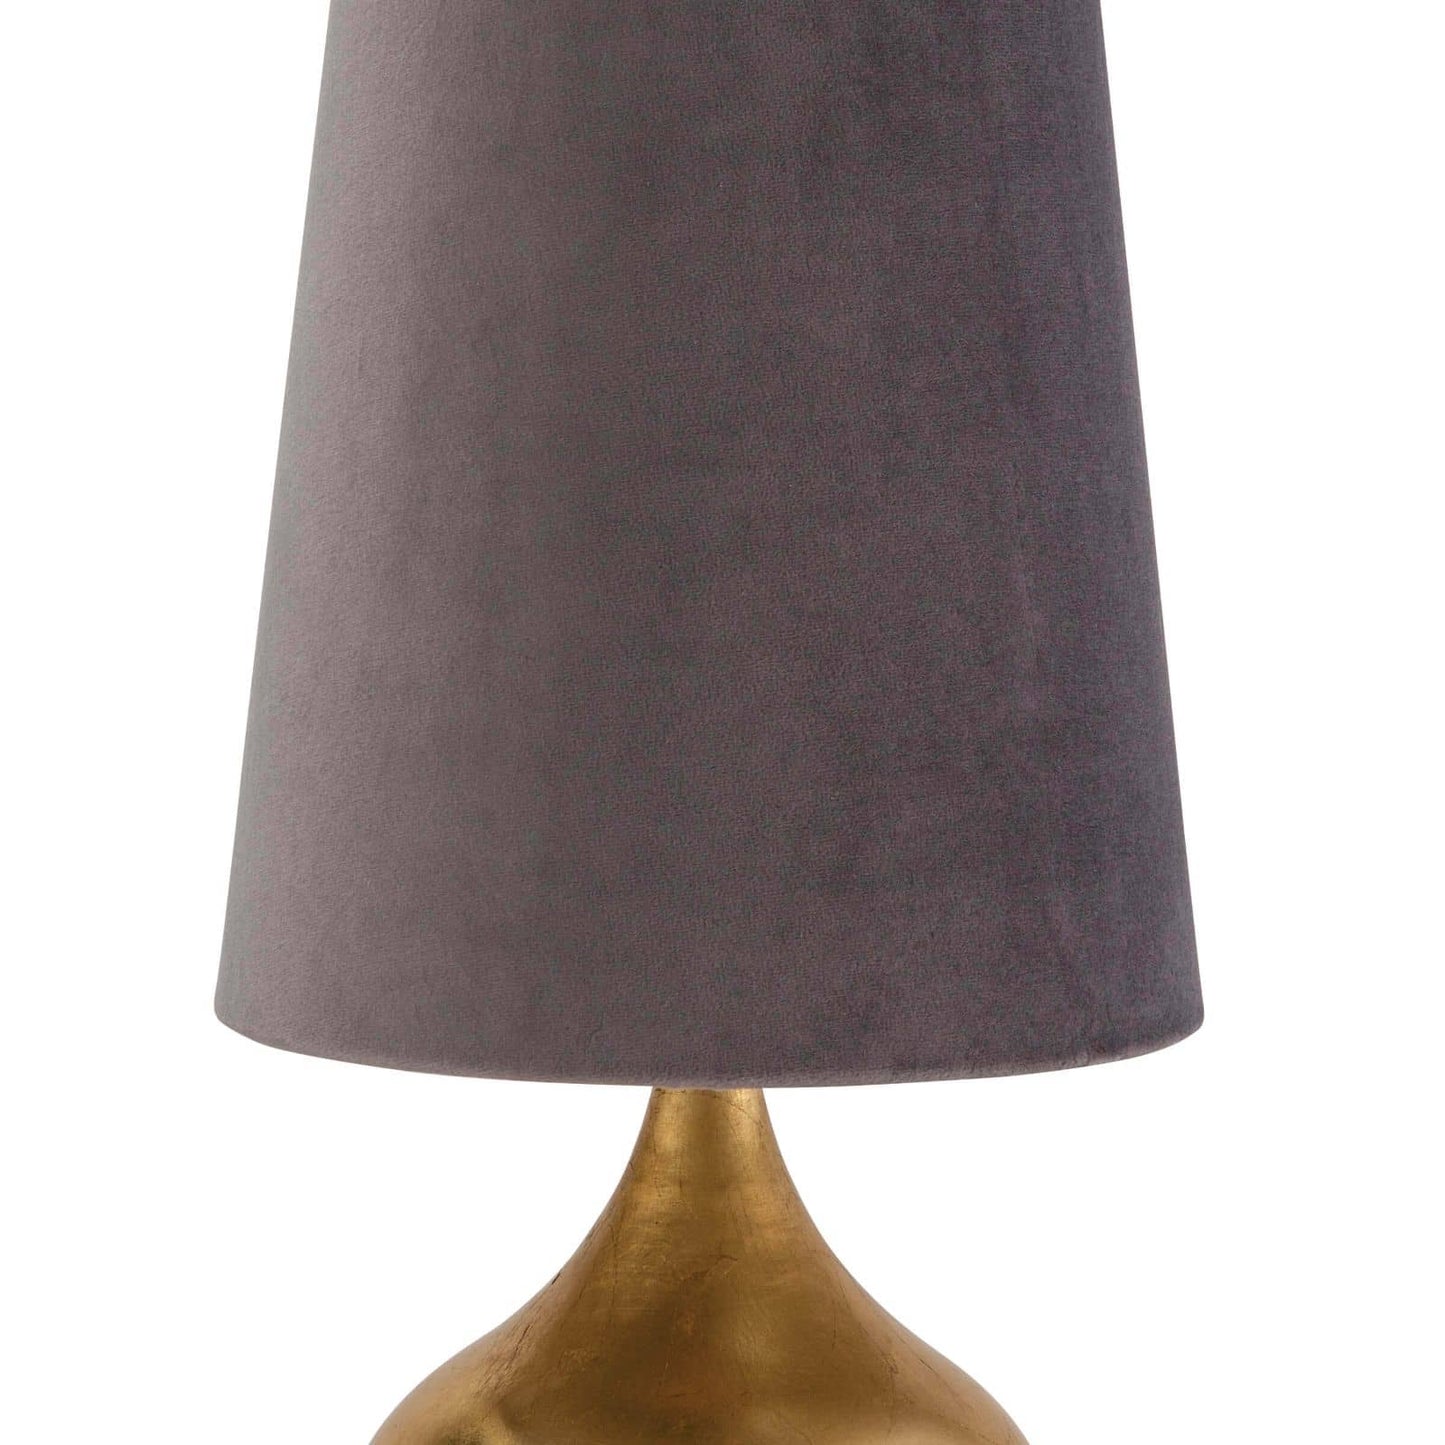 Southern Living Airel Table Lamp